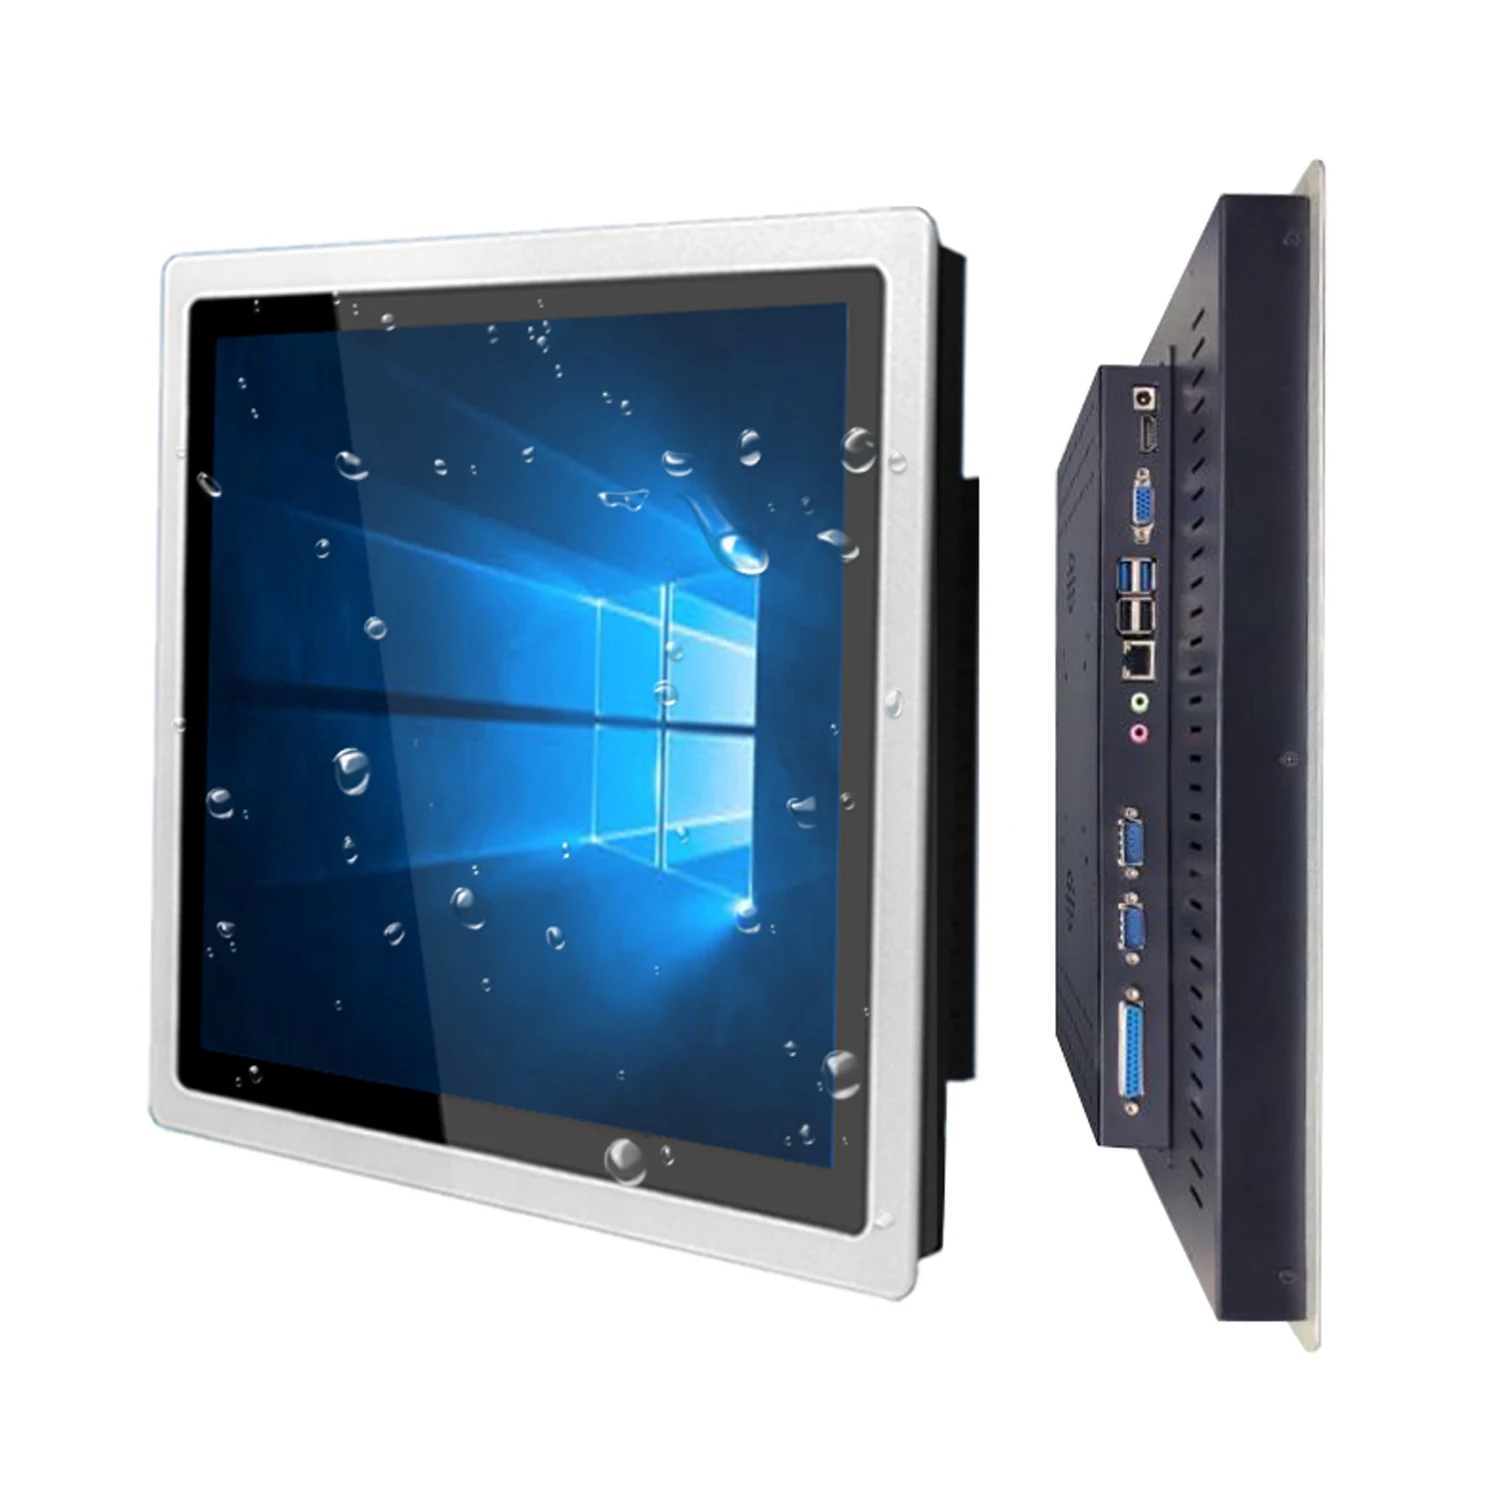 17 Inch embedded industrial computer with capacitive touch screen mini tablet all-in-one PC Intel Core i7-6500U for win 10 Pro